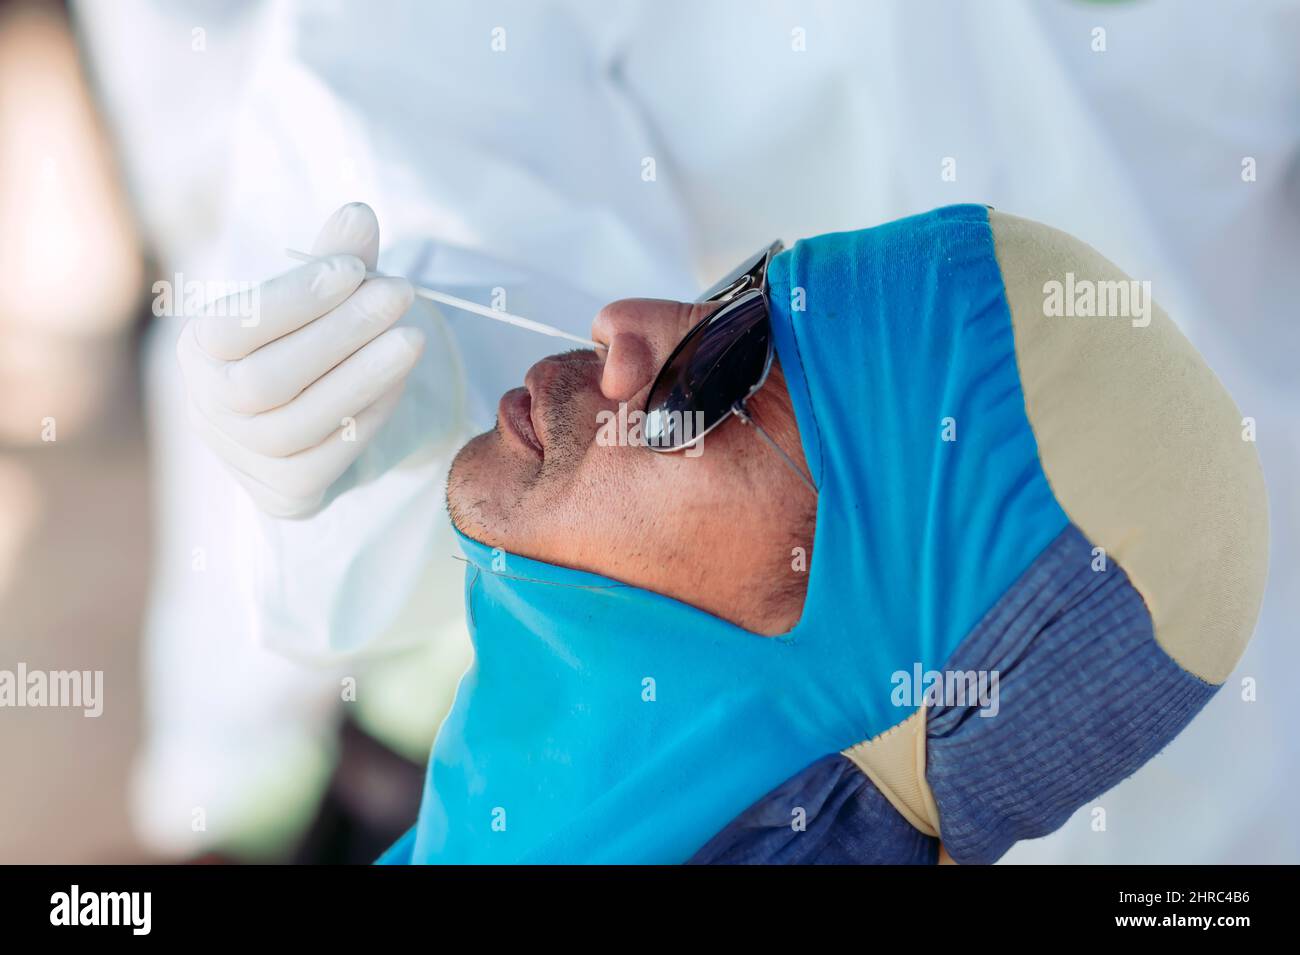 Man having a COVID-19 antigen test done by a medical professional Stock Photo